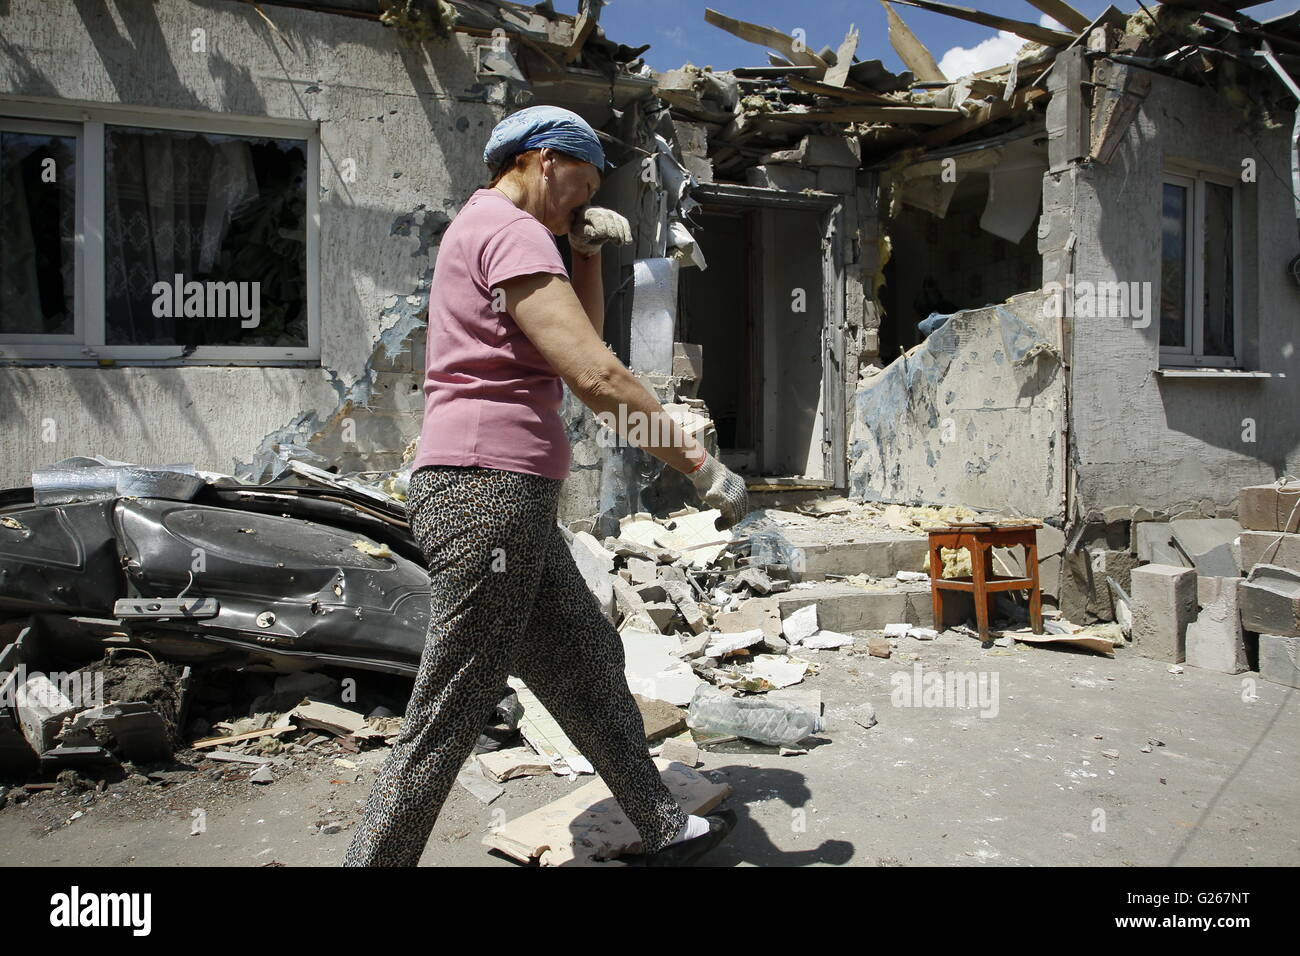 Donetsk, Ukraine. 24th May, 2016. A woman reacts next to her destroyed home after shelling in rebels controlled Staromykhaylivka village near Donetsk, Ukraine, May 24, 2016. Kremlin spokesman Dmitry Peskov confirmed that the Special Monitoring Mission to Ukraine under the Organization for Security and Co-operation in Europe is being discussed. Credit:  Alexander Ermochenko/Xinhua/Alamy Live News Stock Photo